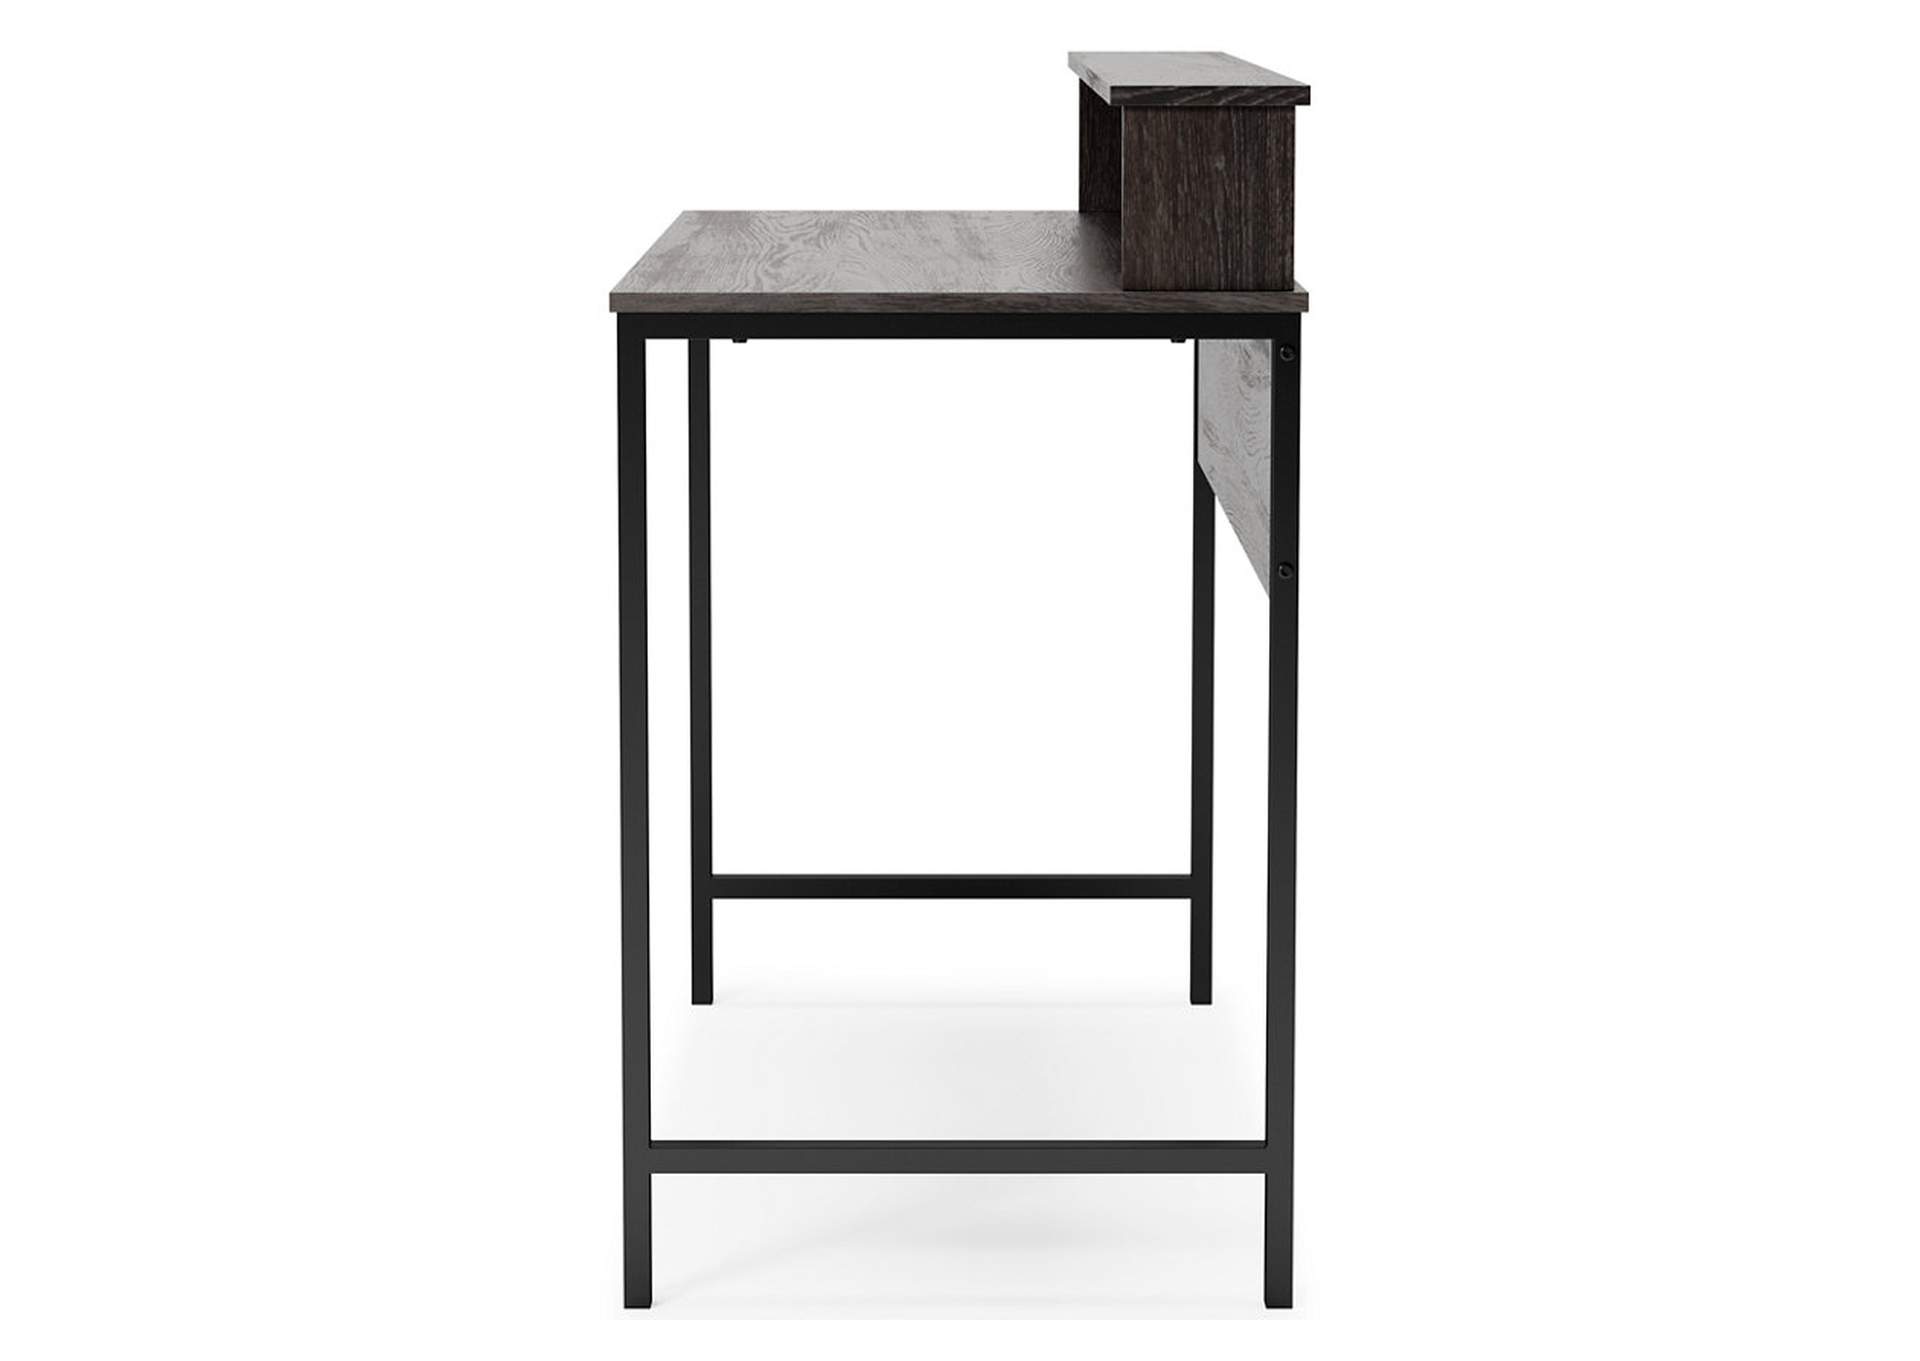 Freedan 37" Home Office Desk,Direct To Consumer Express